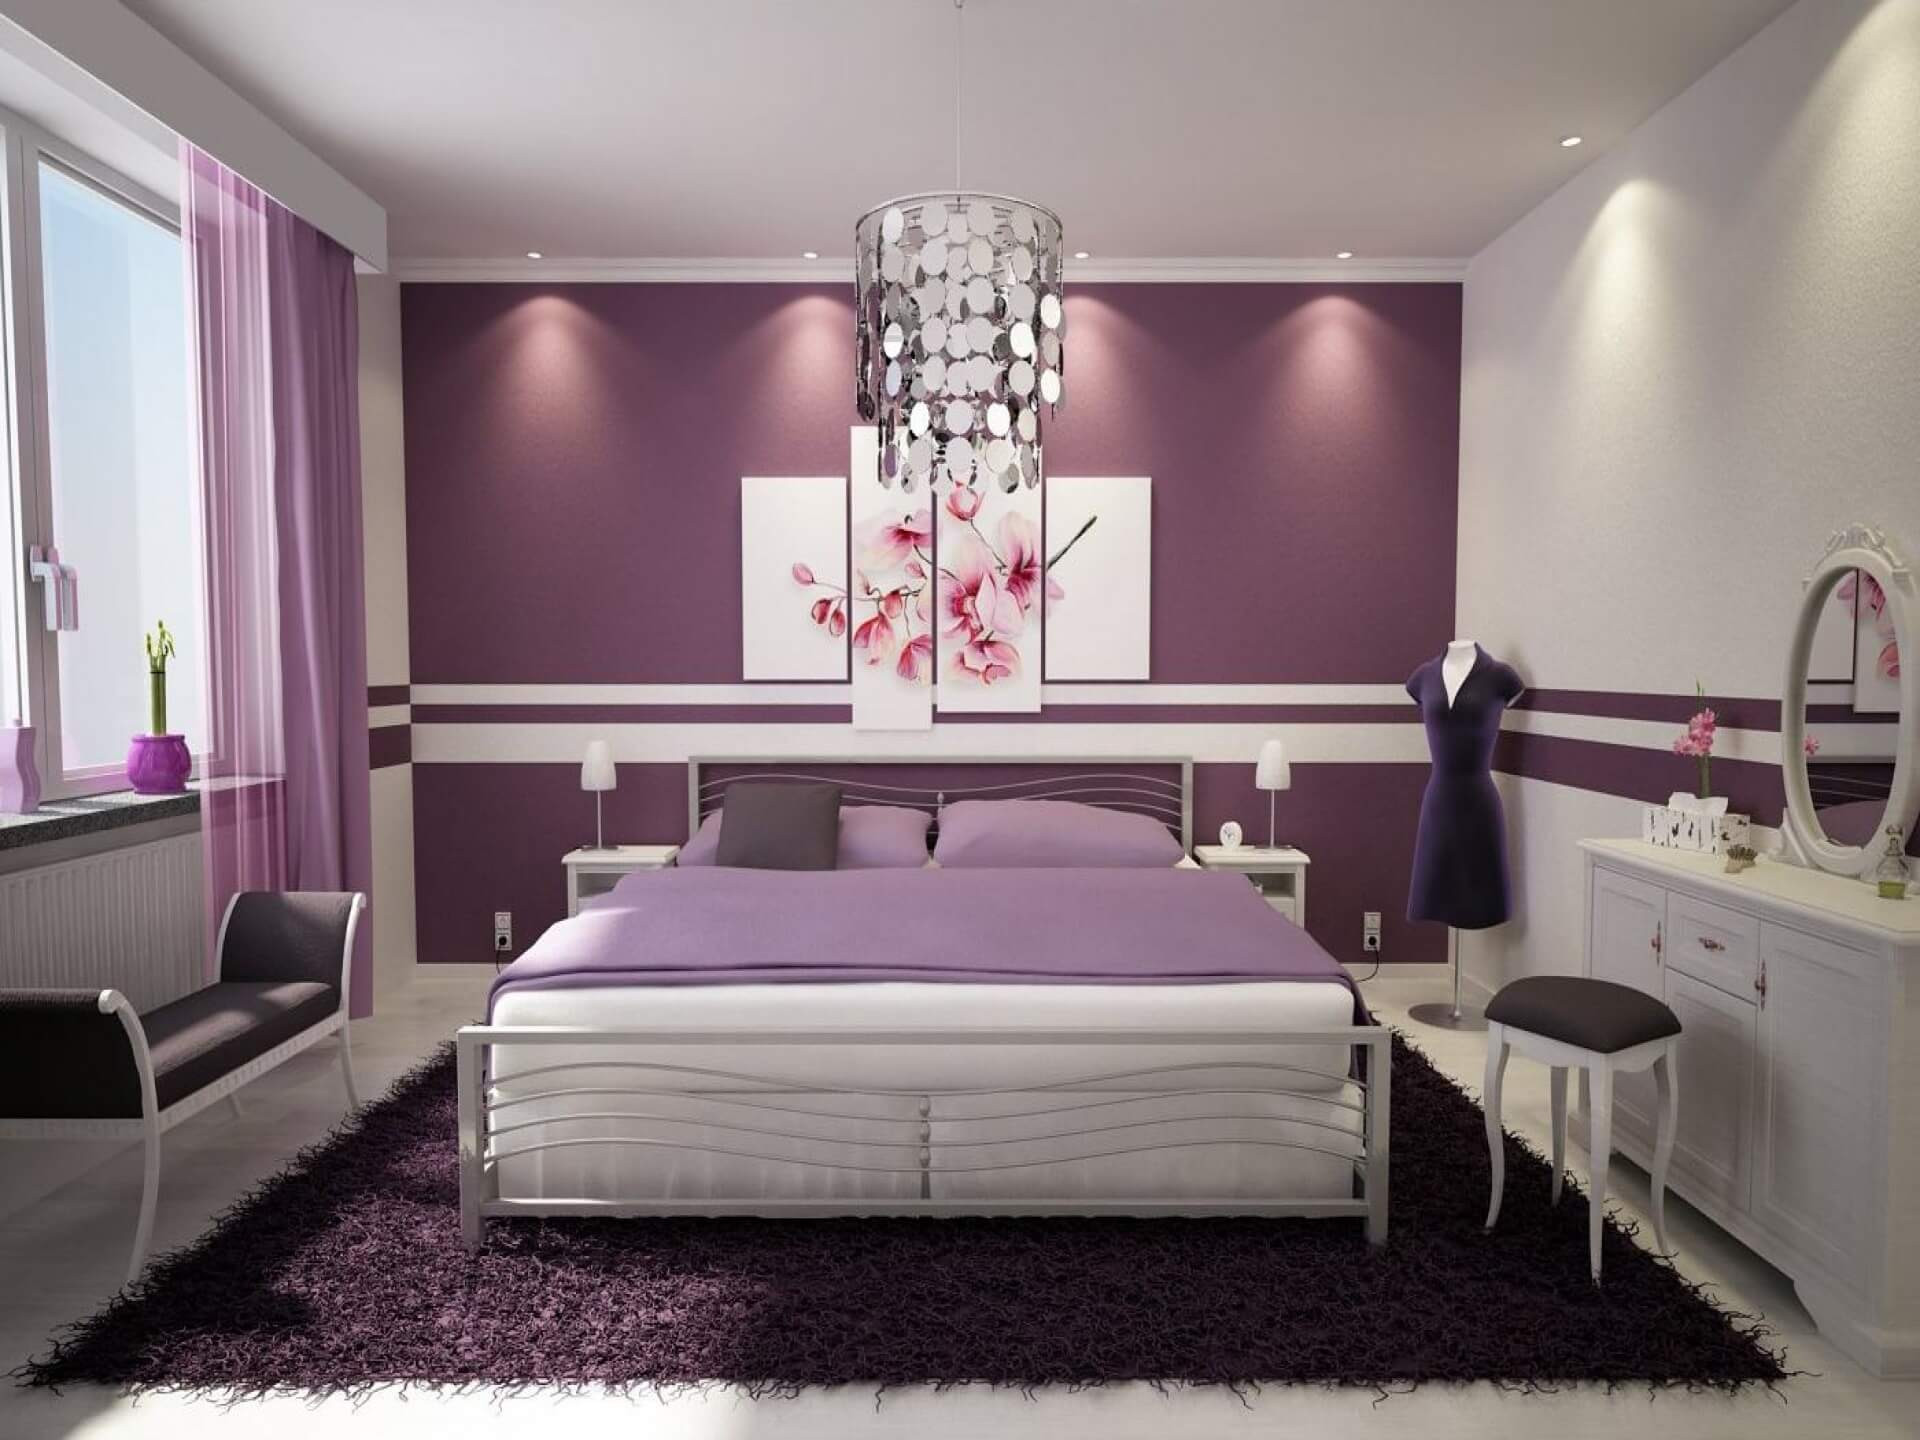 Ideas For Painting Bedroom
 Top 10 Girls Bedroom Paint Ideas 2017 TheyDesign